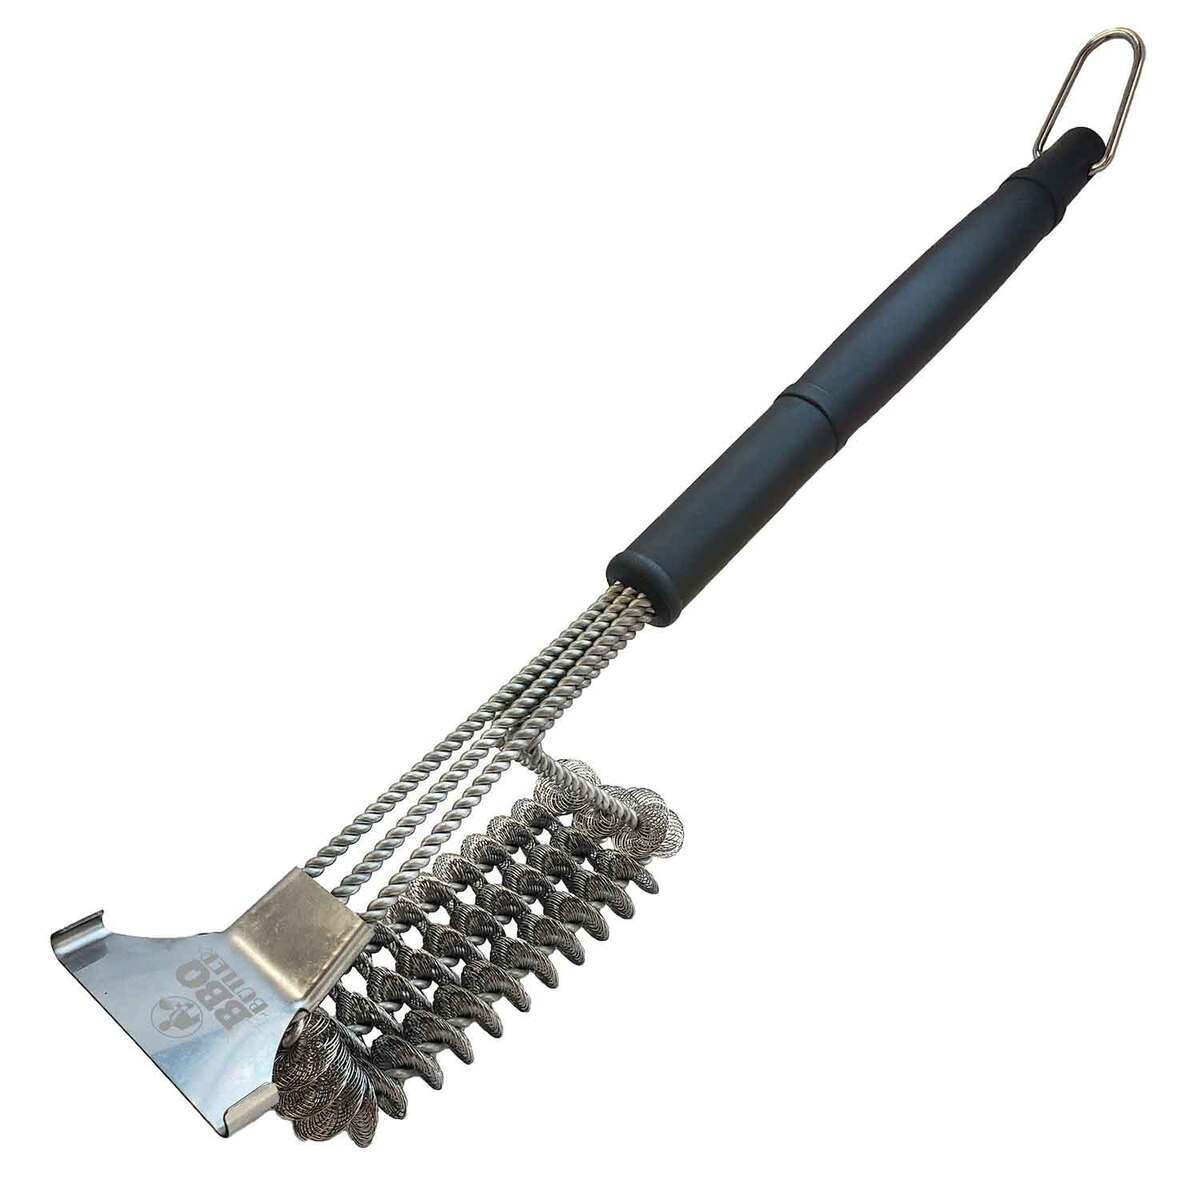 /assets/images/products/product-images/TB65Z6BTXDJR0/64a83fcd01511_bbq-butler-stainless-steel-grill-brush-1771278-1.jpg